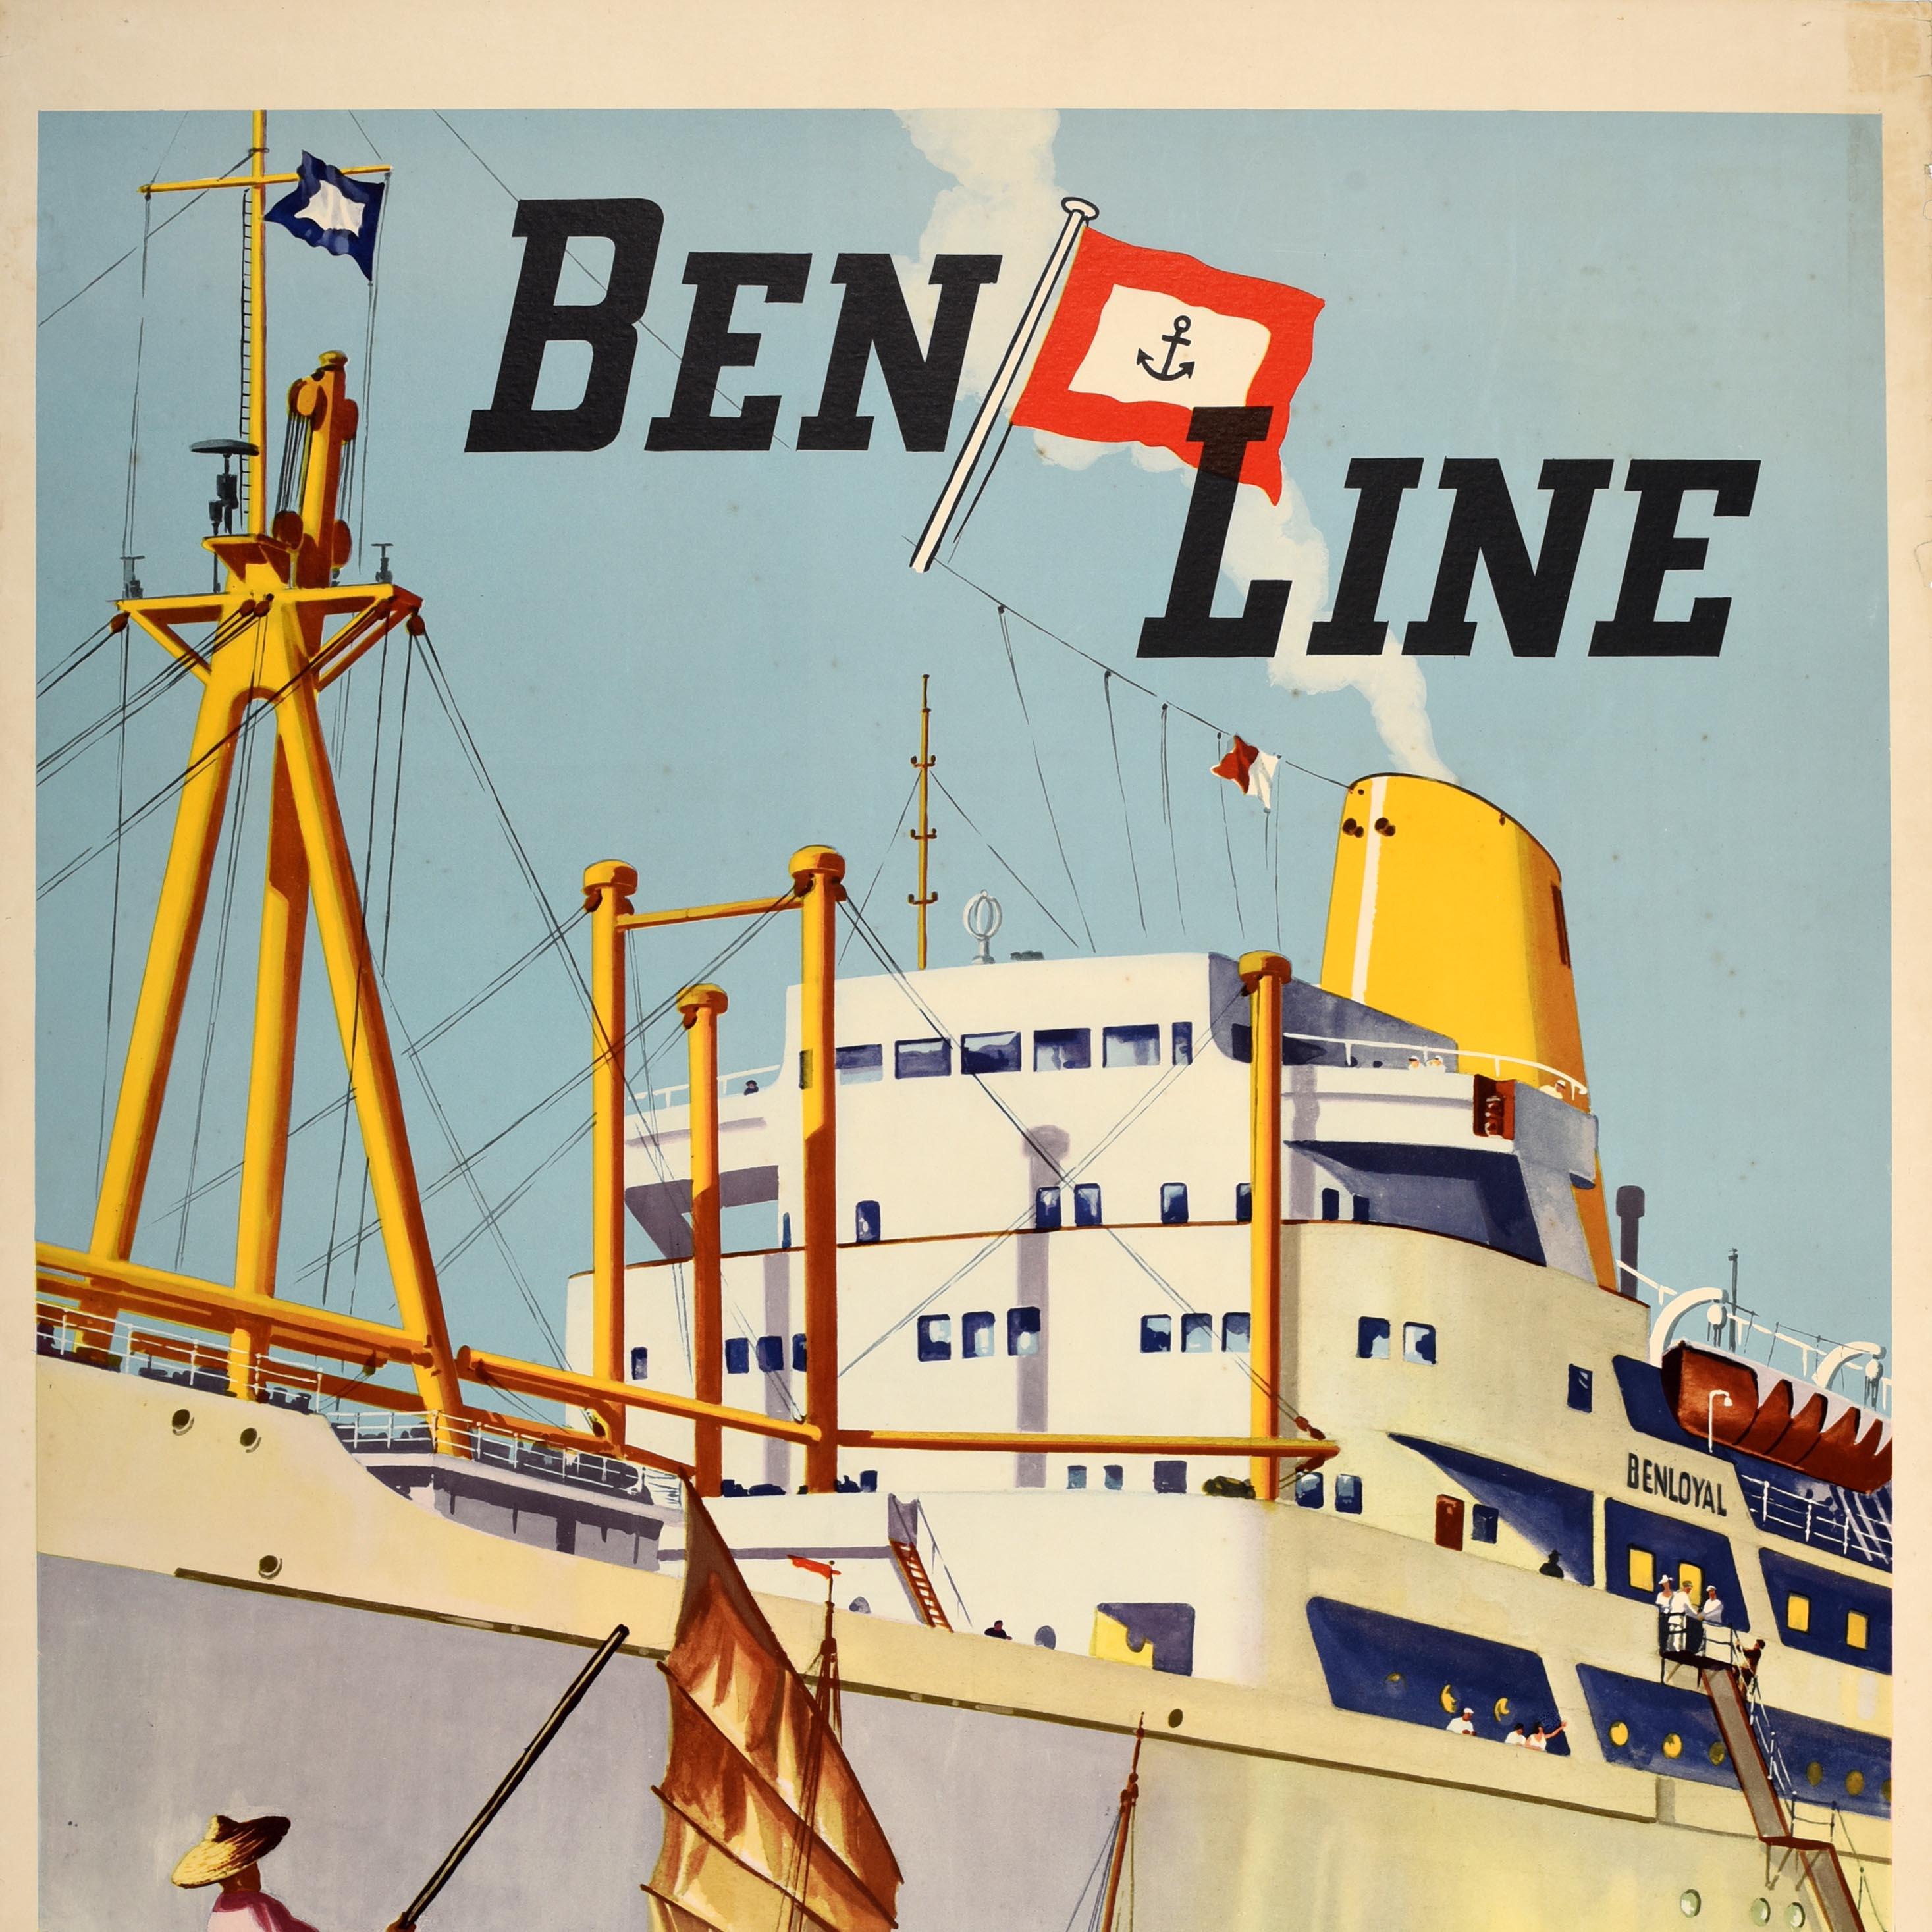 Original vintage travel advertising poster for Ben Line Cargo & Passenger Services Europe Far East featuring cruise passengers on the decks of a white steamship with a yellow funnel looking at smaller boats sailing towards them on the sea in the